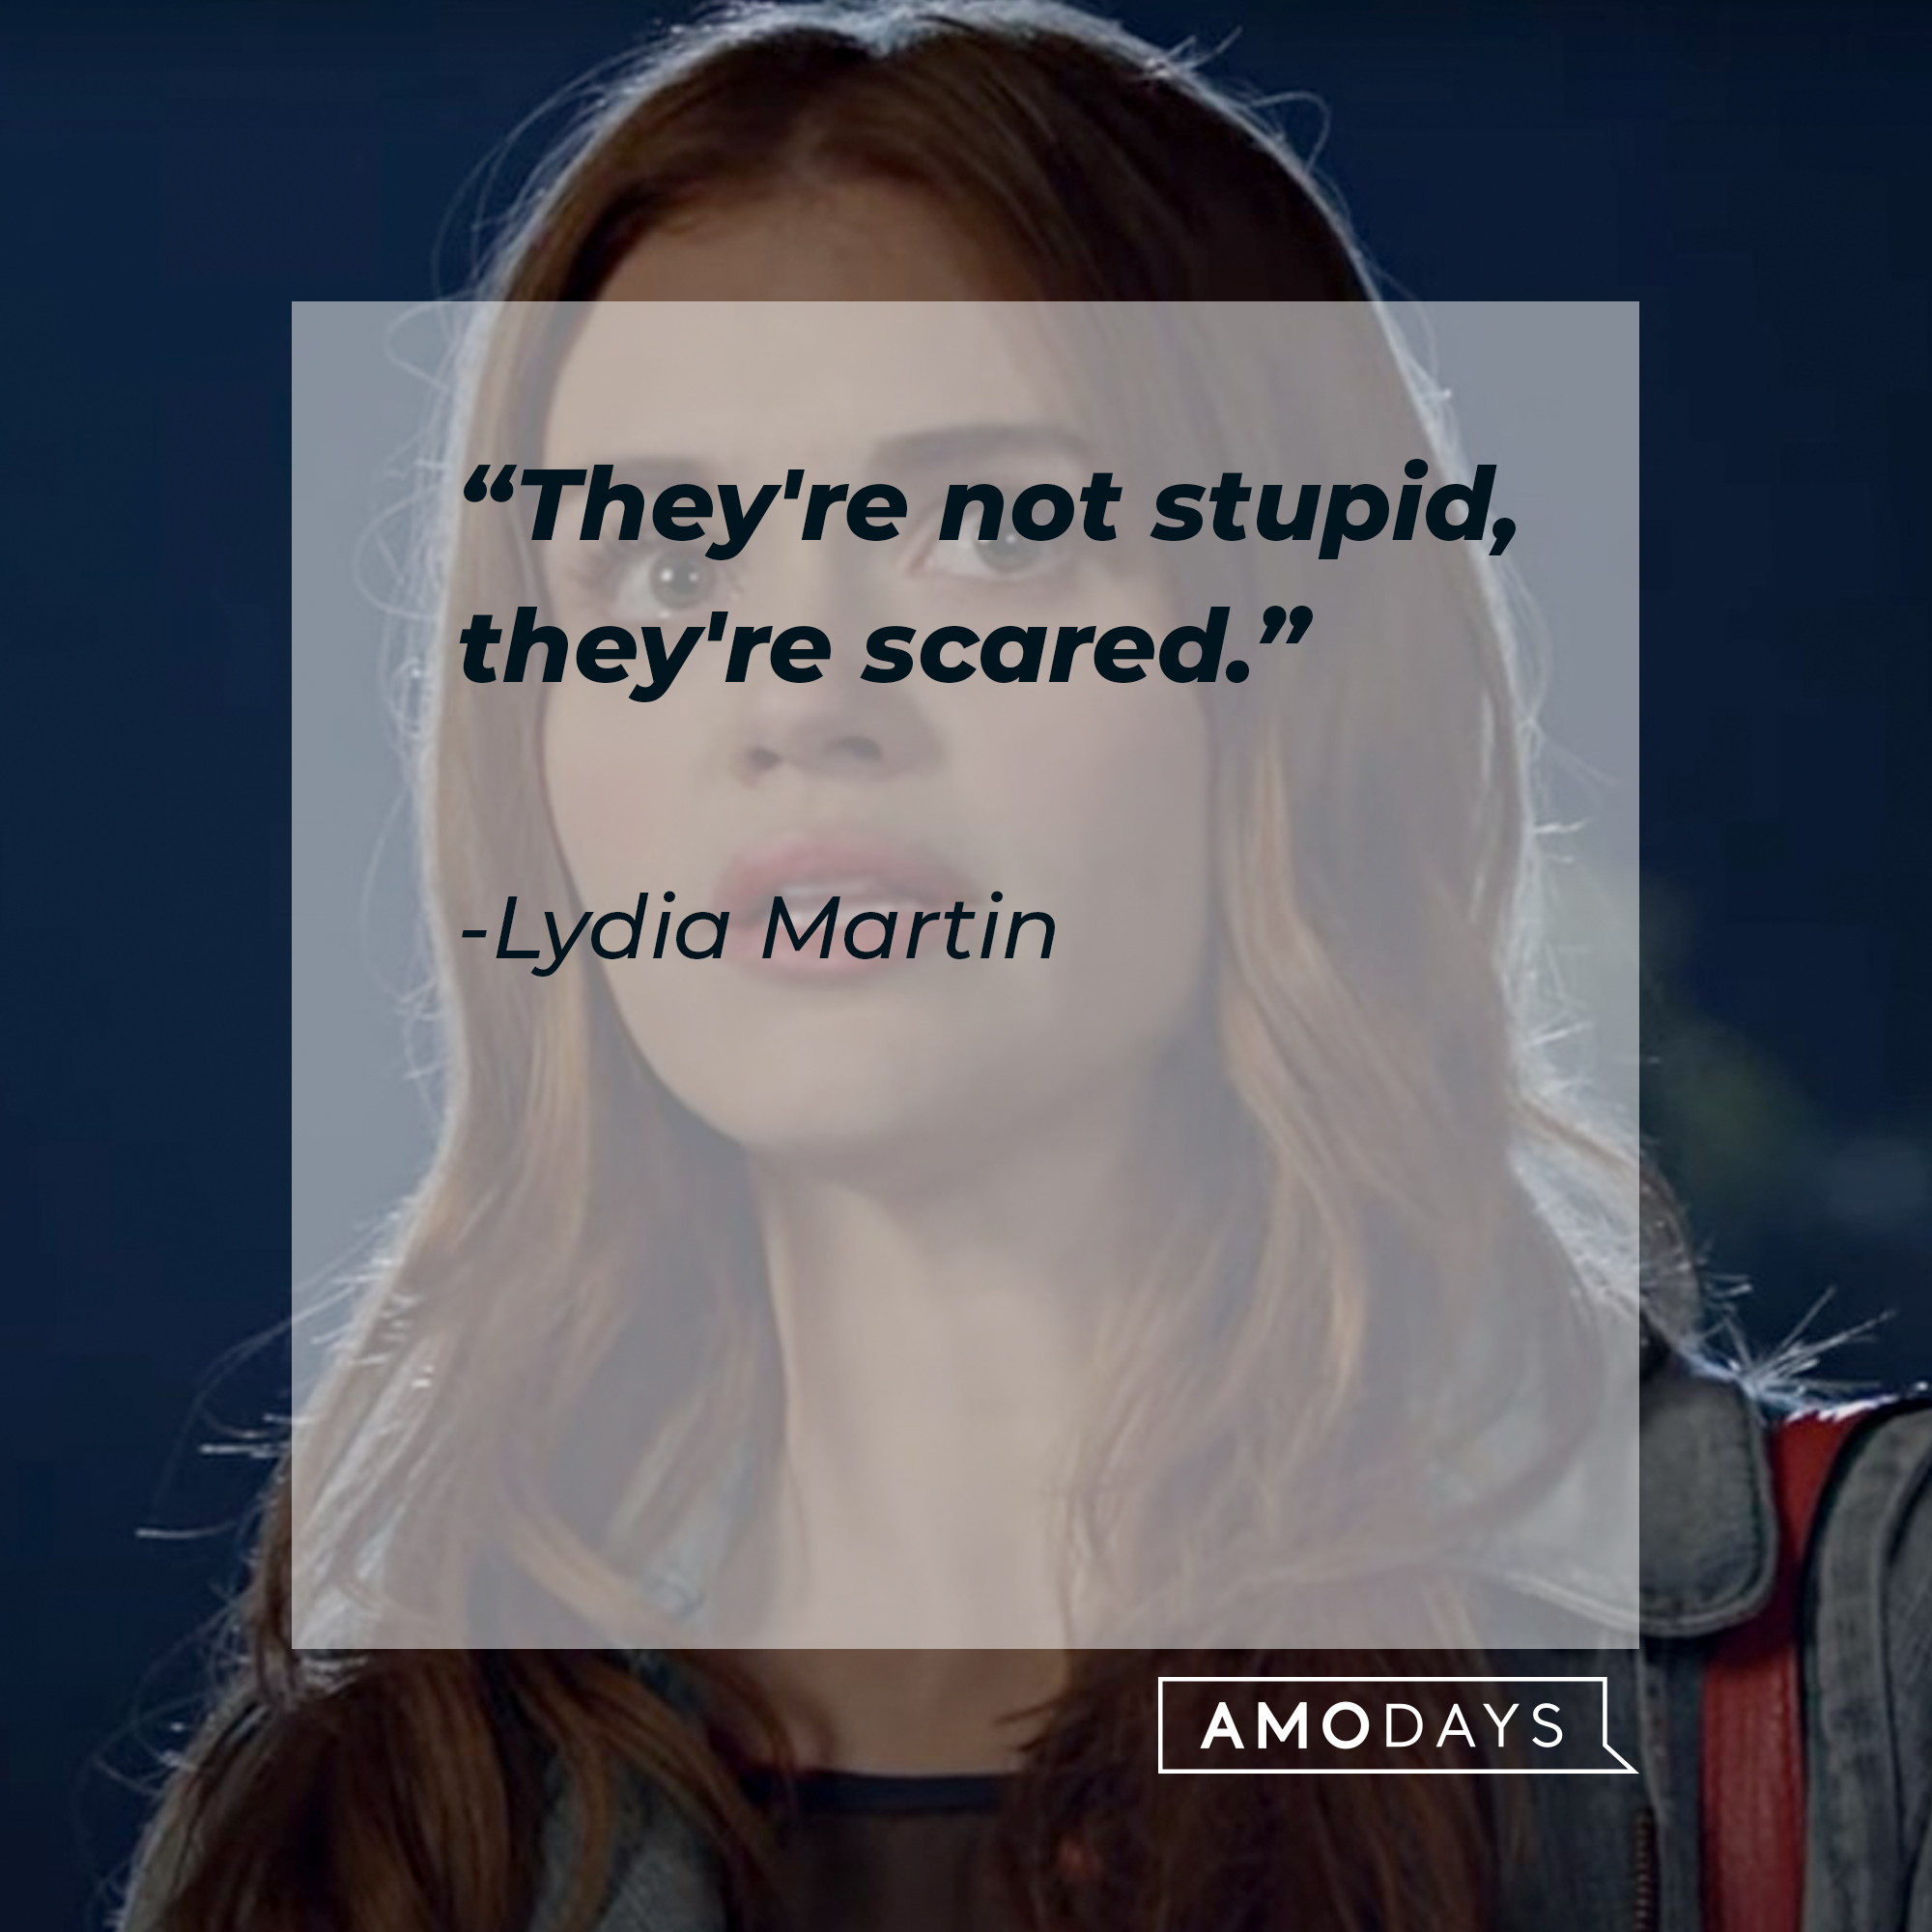 Lydia Martin, with her quote: “They're not stupid; they're scared.” | Source: facebook.com/TeenWolf